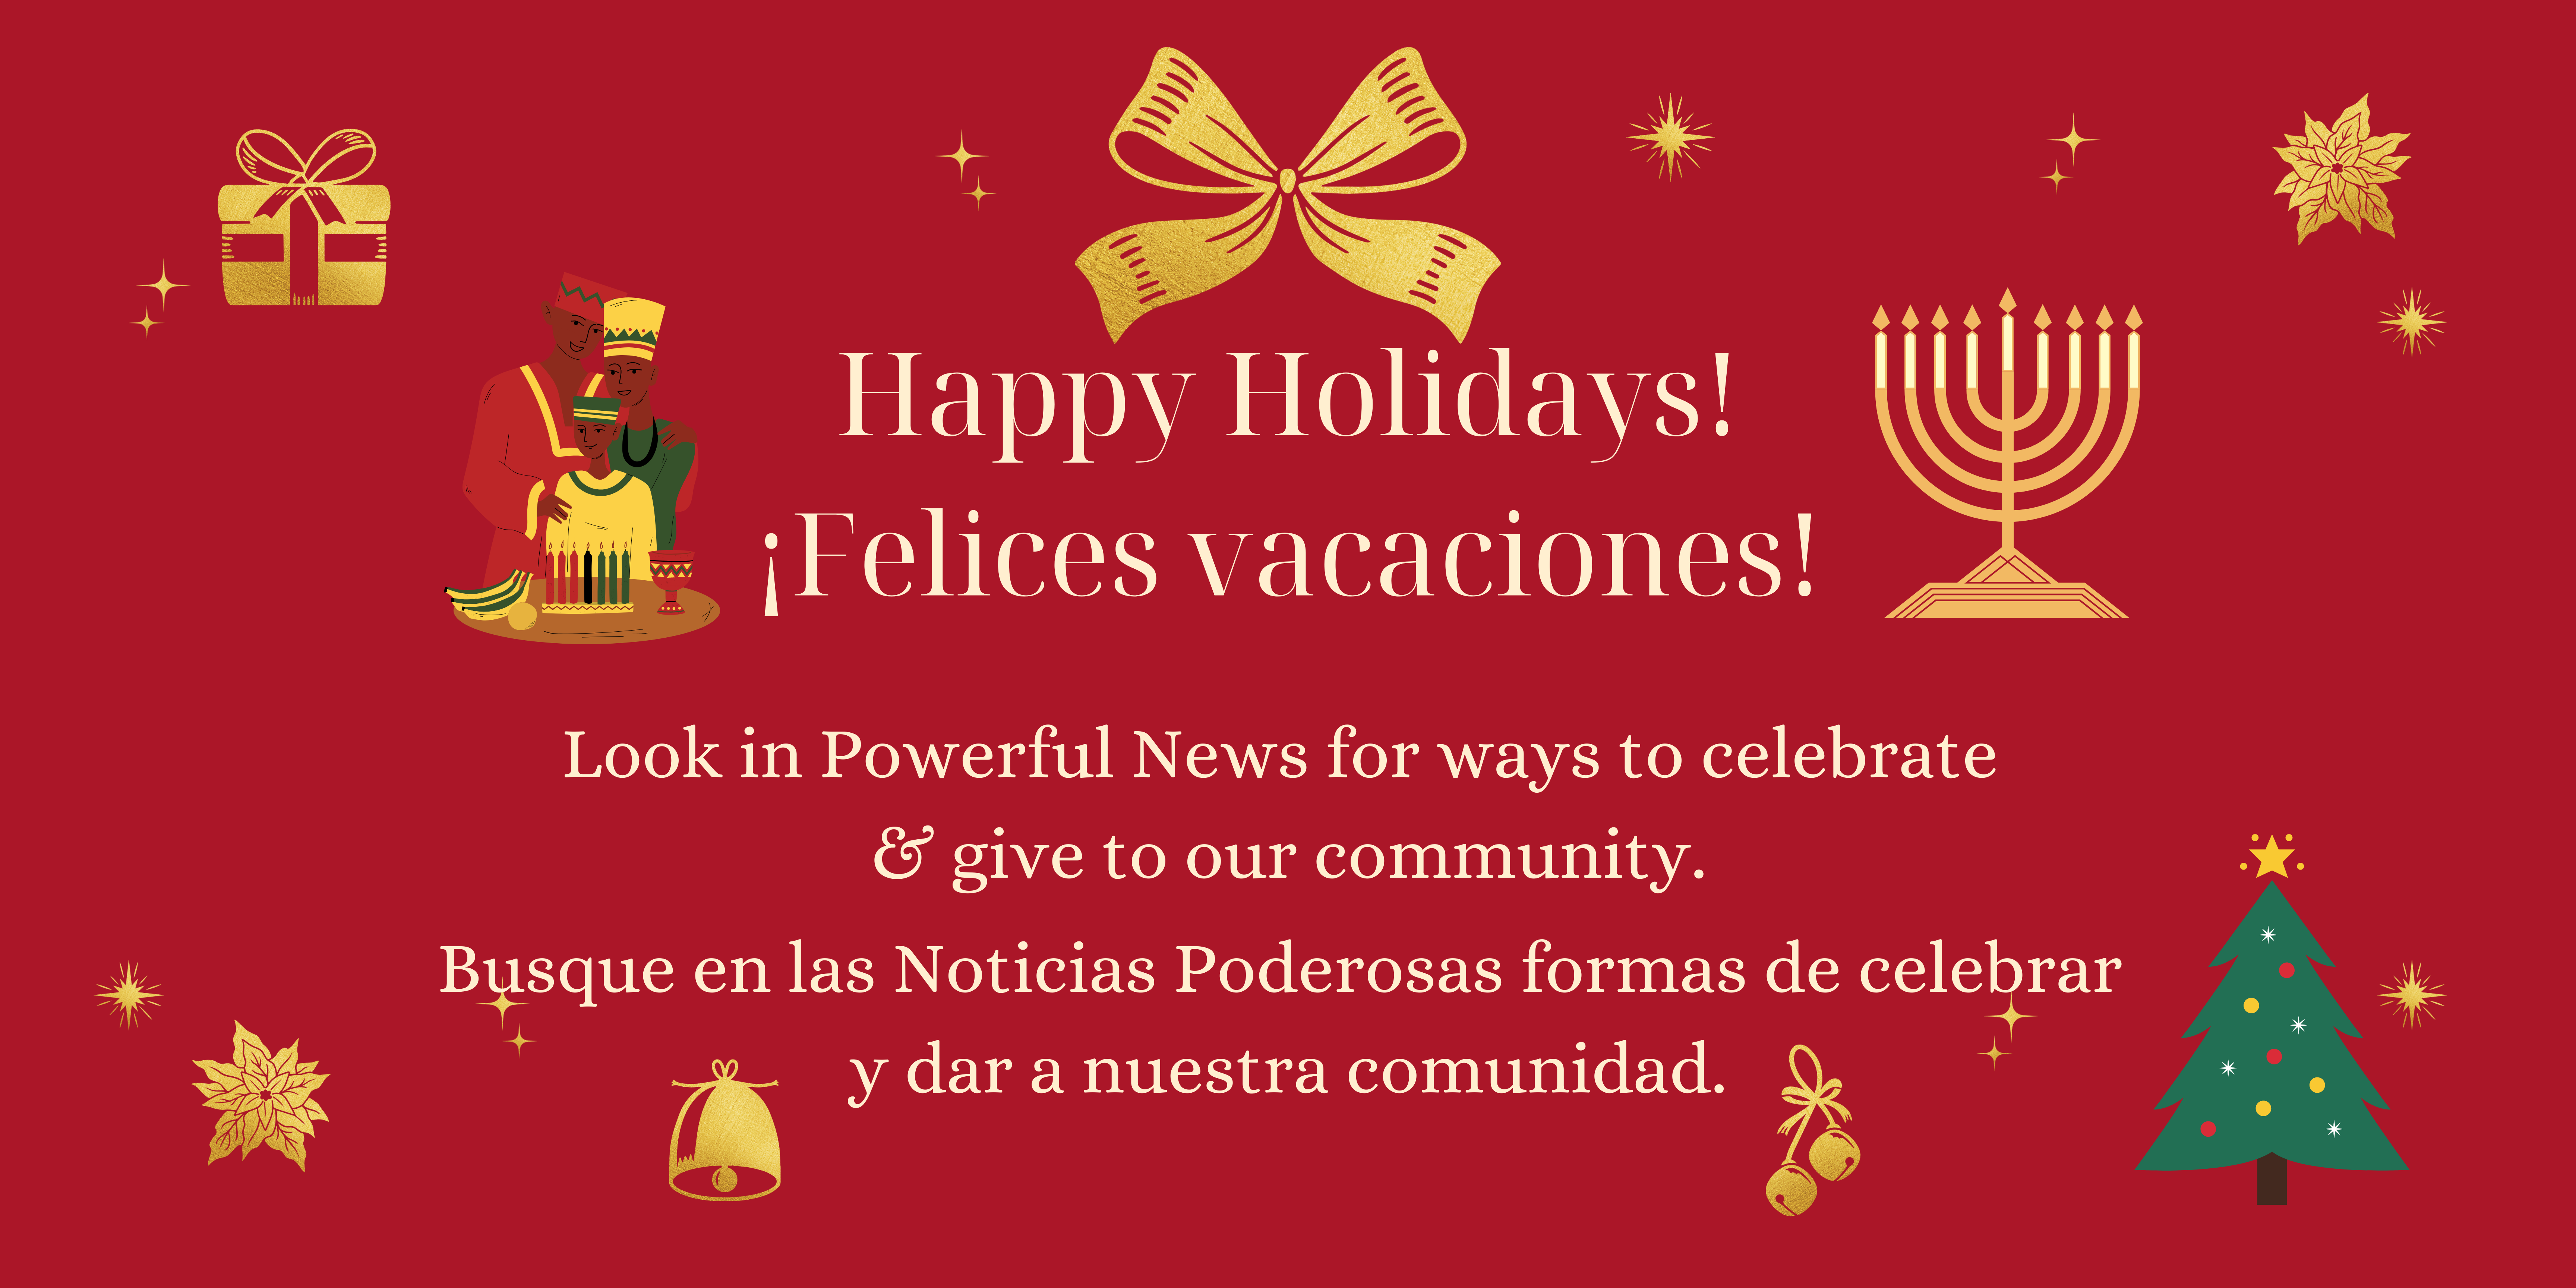 Happy Holidays! on red background with gold images of bells, bows, menorah, and Kwanzaa celebrations